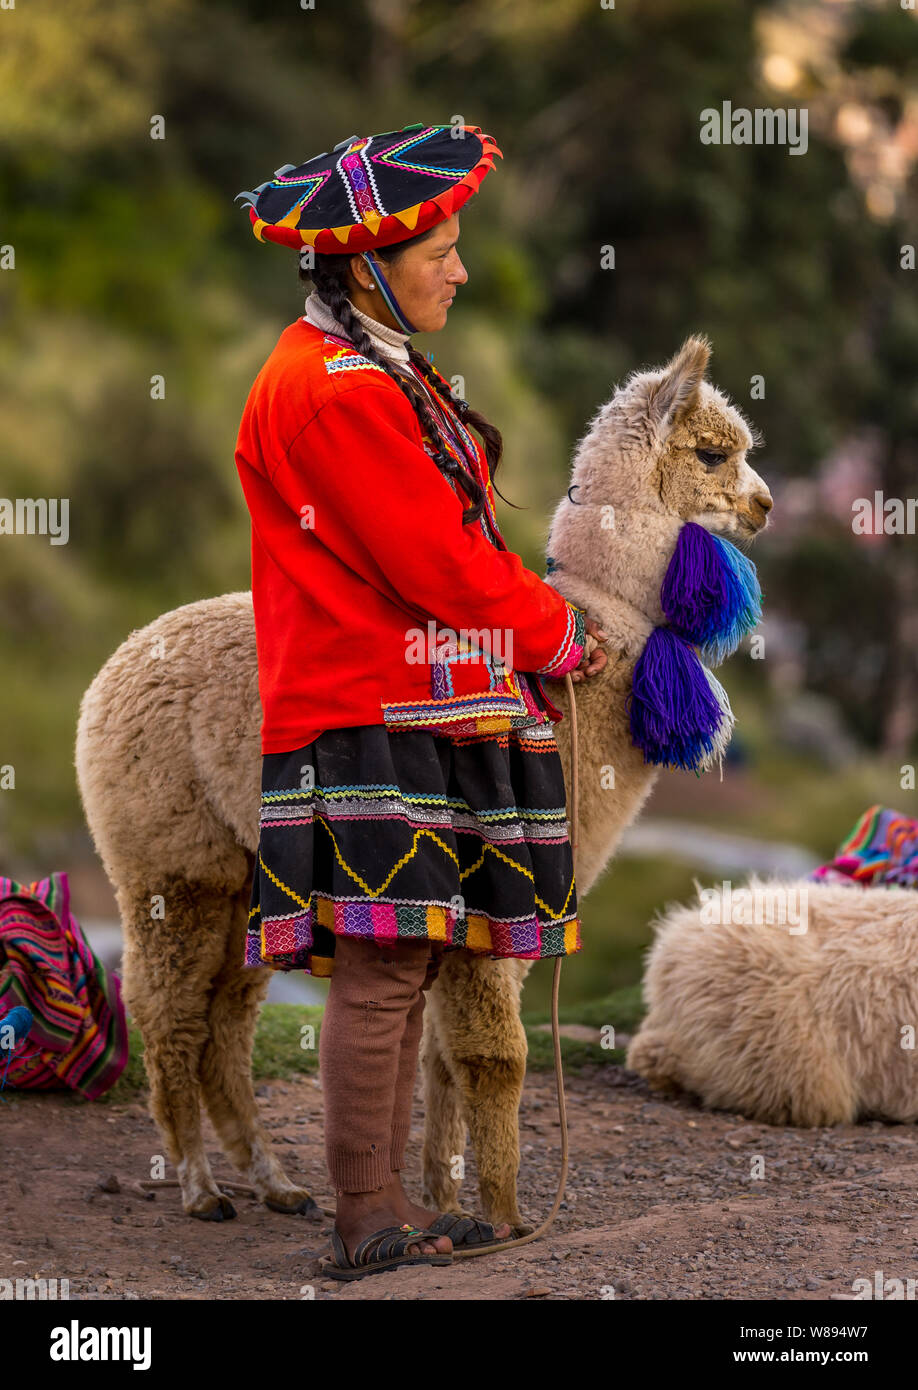 Cuzco, Peru - May 3, 2019. Peruvian woman with traditional clothing standing with alpaca Stock Photo